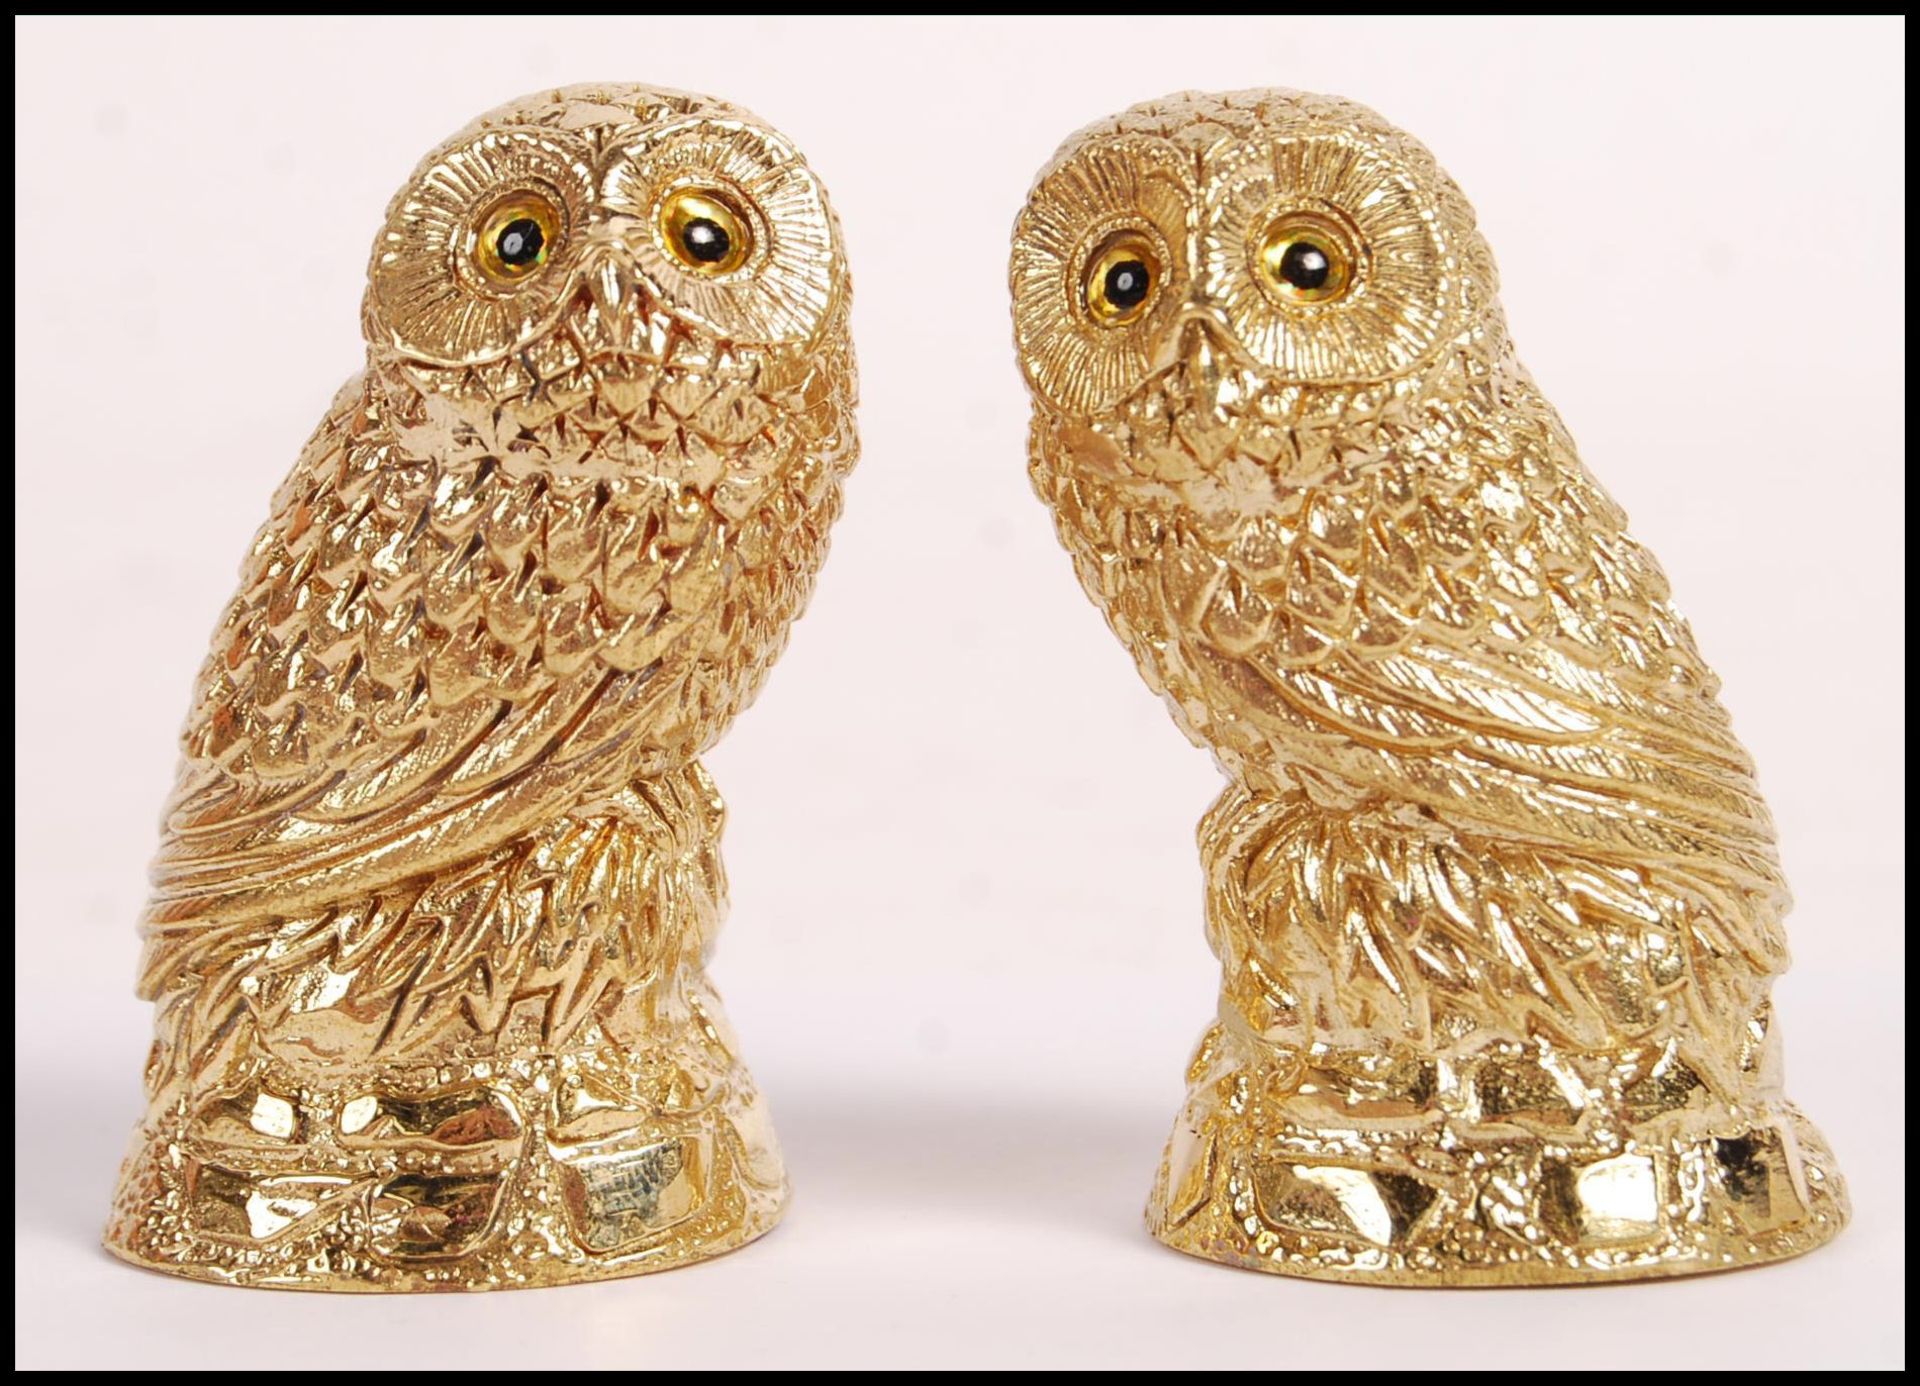 A pair of 18ct gold plated condiments in the form of owls having yellow and black glass eyes.